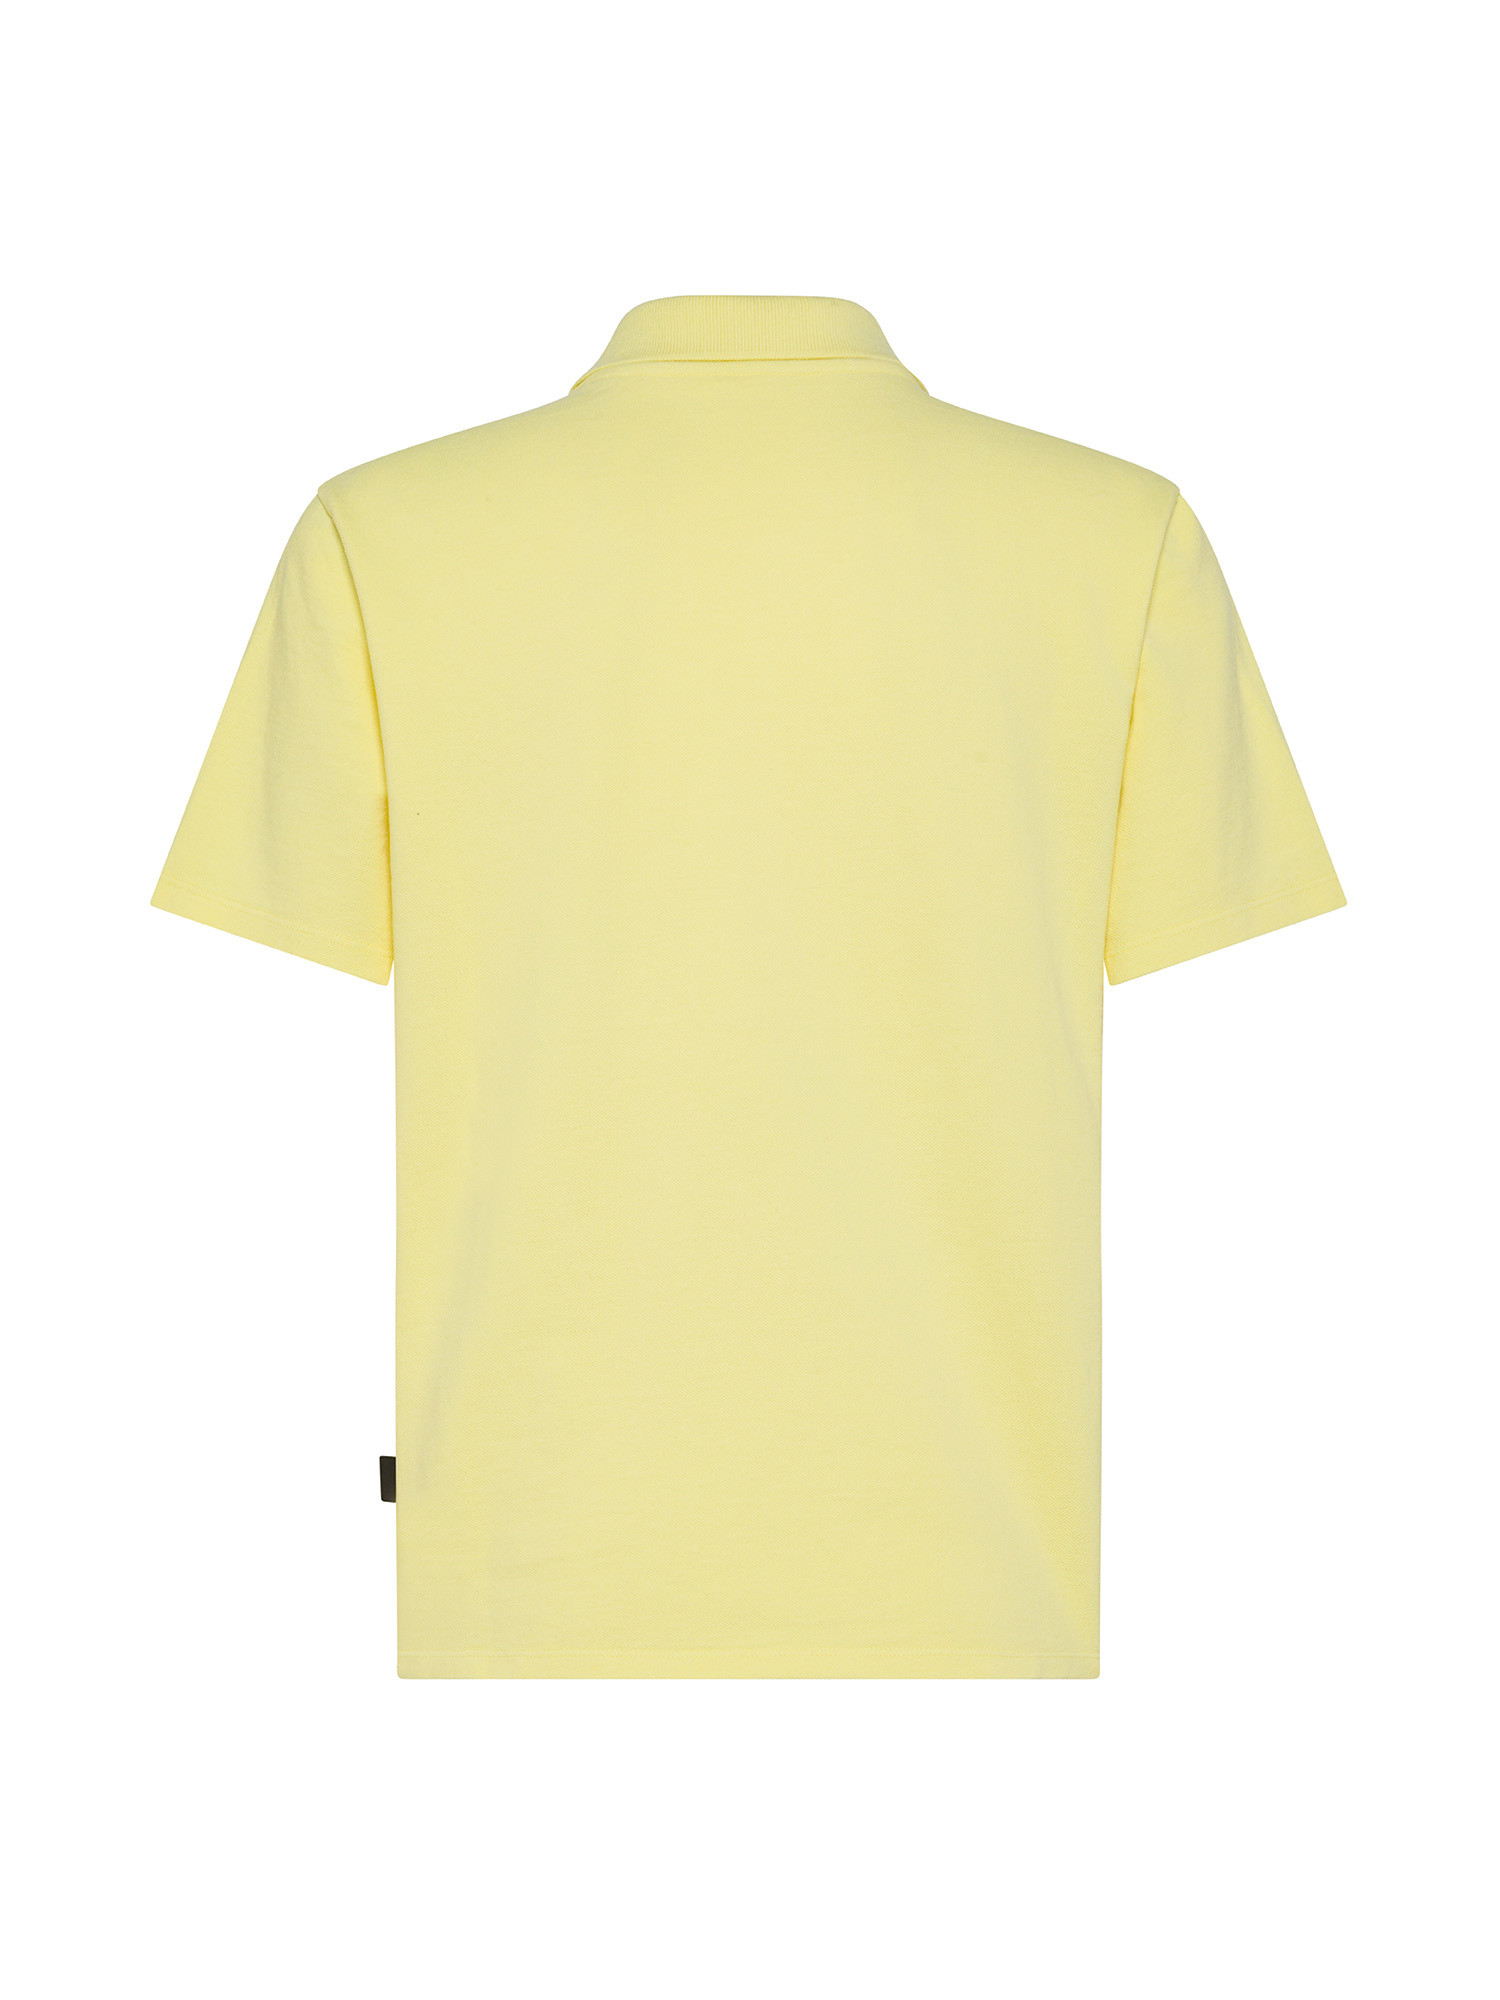 Ecoalf - Ancona T-shirt with embroidered logo, Yellow, large image number 1